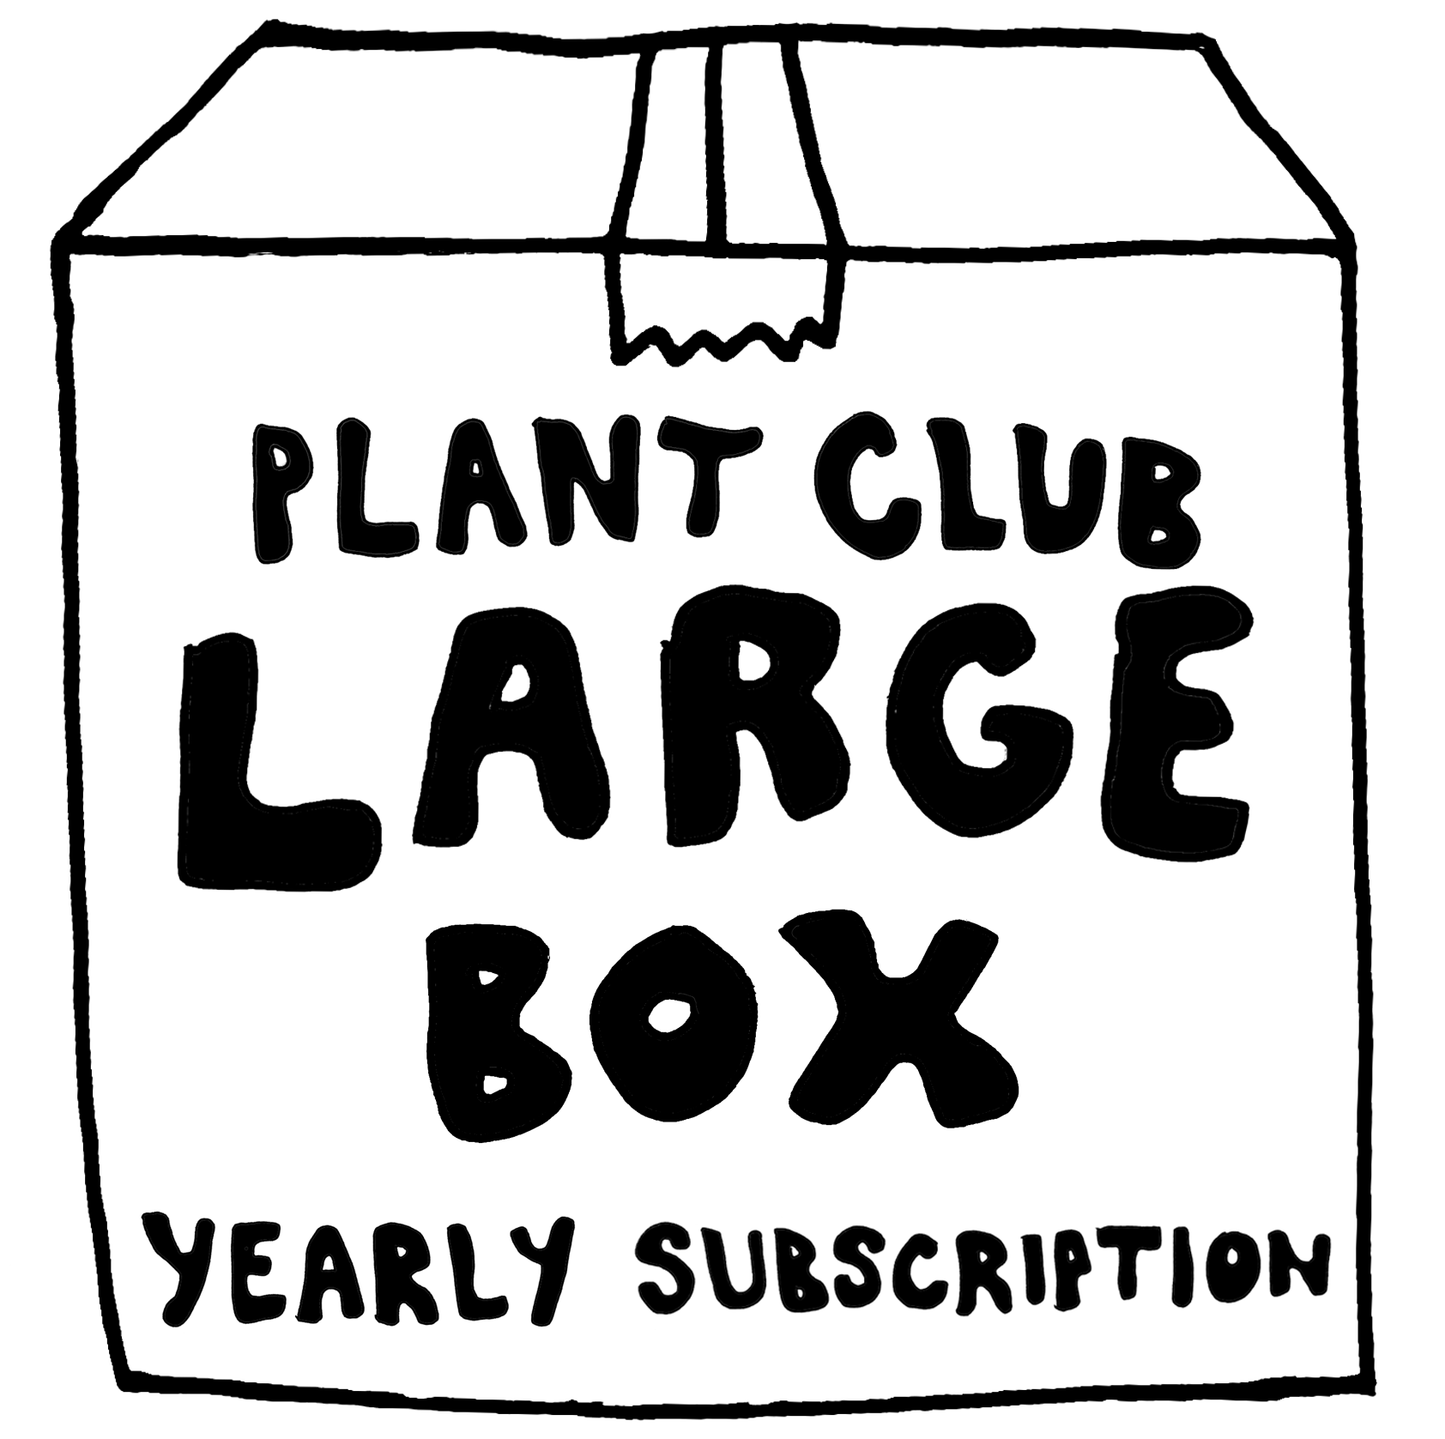 PLANT CLUB - LARGE BOX (YEARLY SUBSCRIPTION)